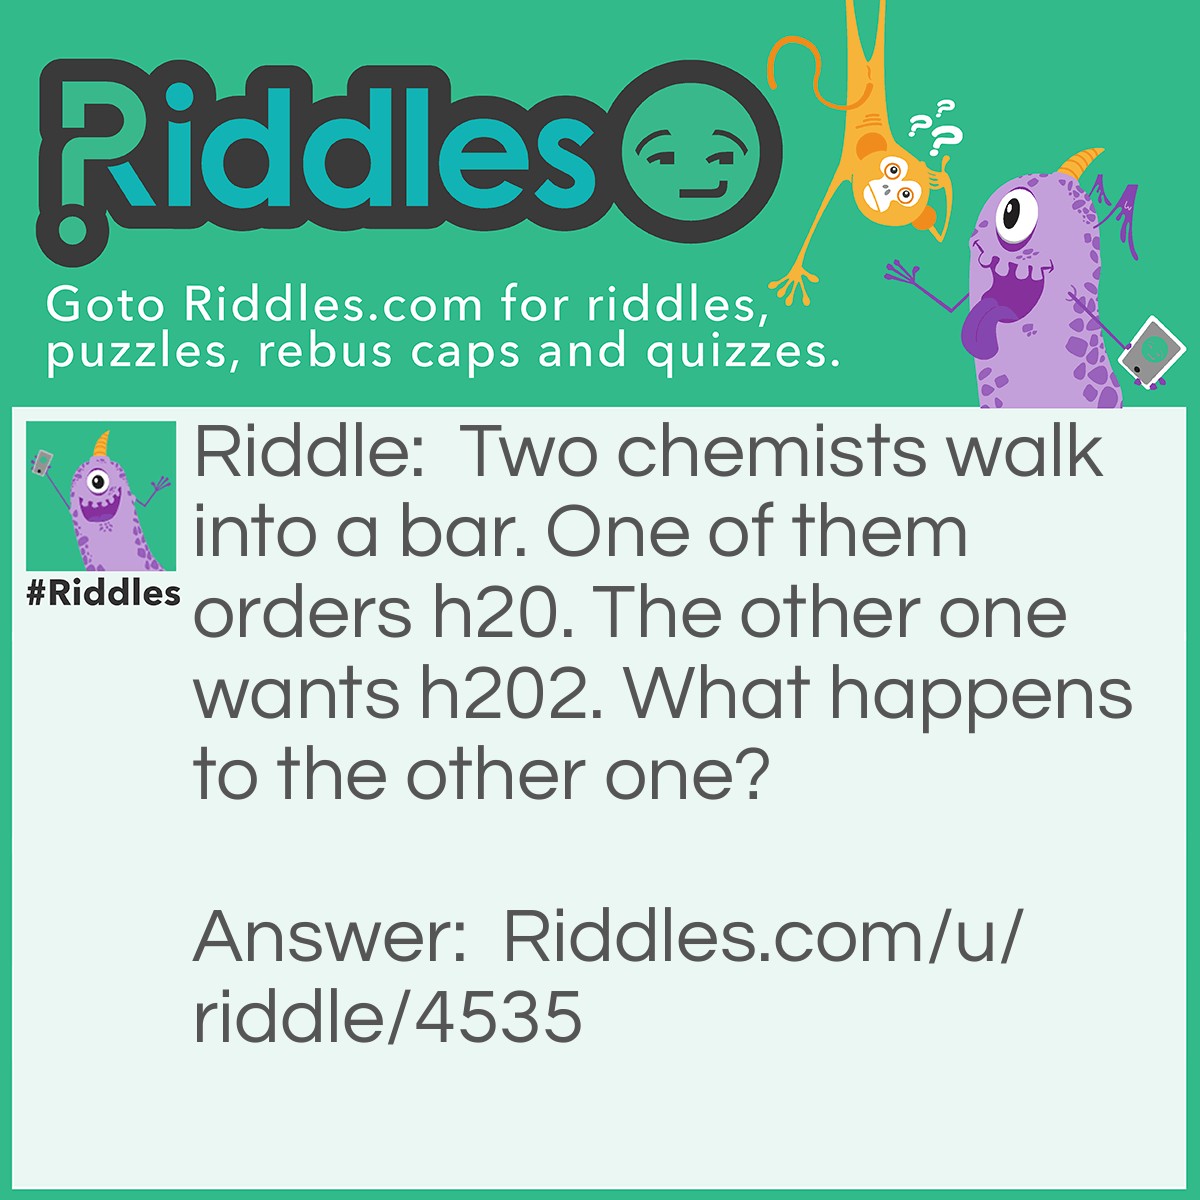 Riddle: Two chemists walk into a bar. One of them orders h20. The other one wants h202. What happens to the other one? Answer: He dies because he drank hydrogen peroxide.